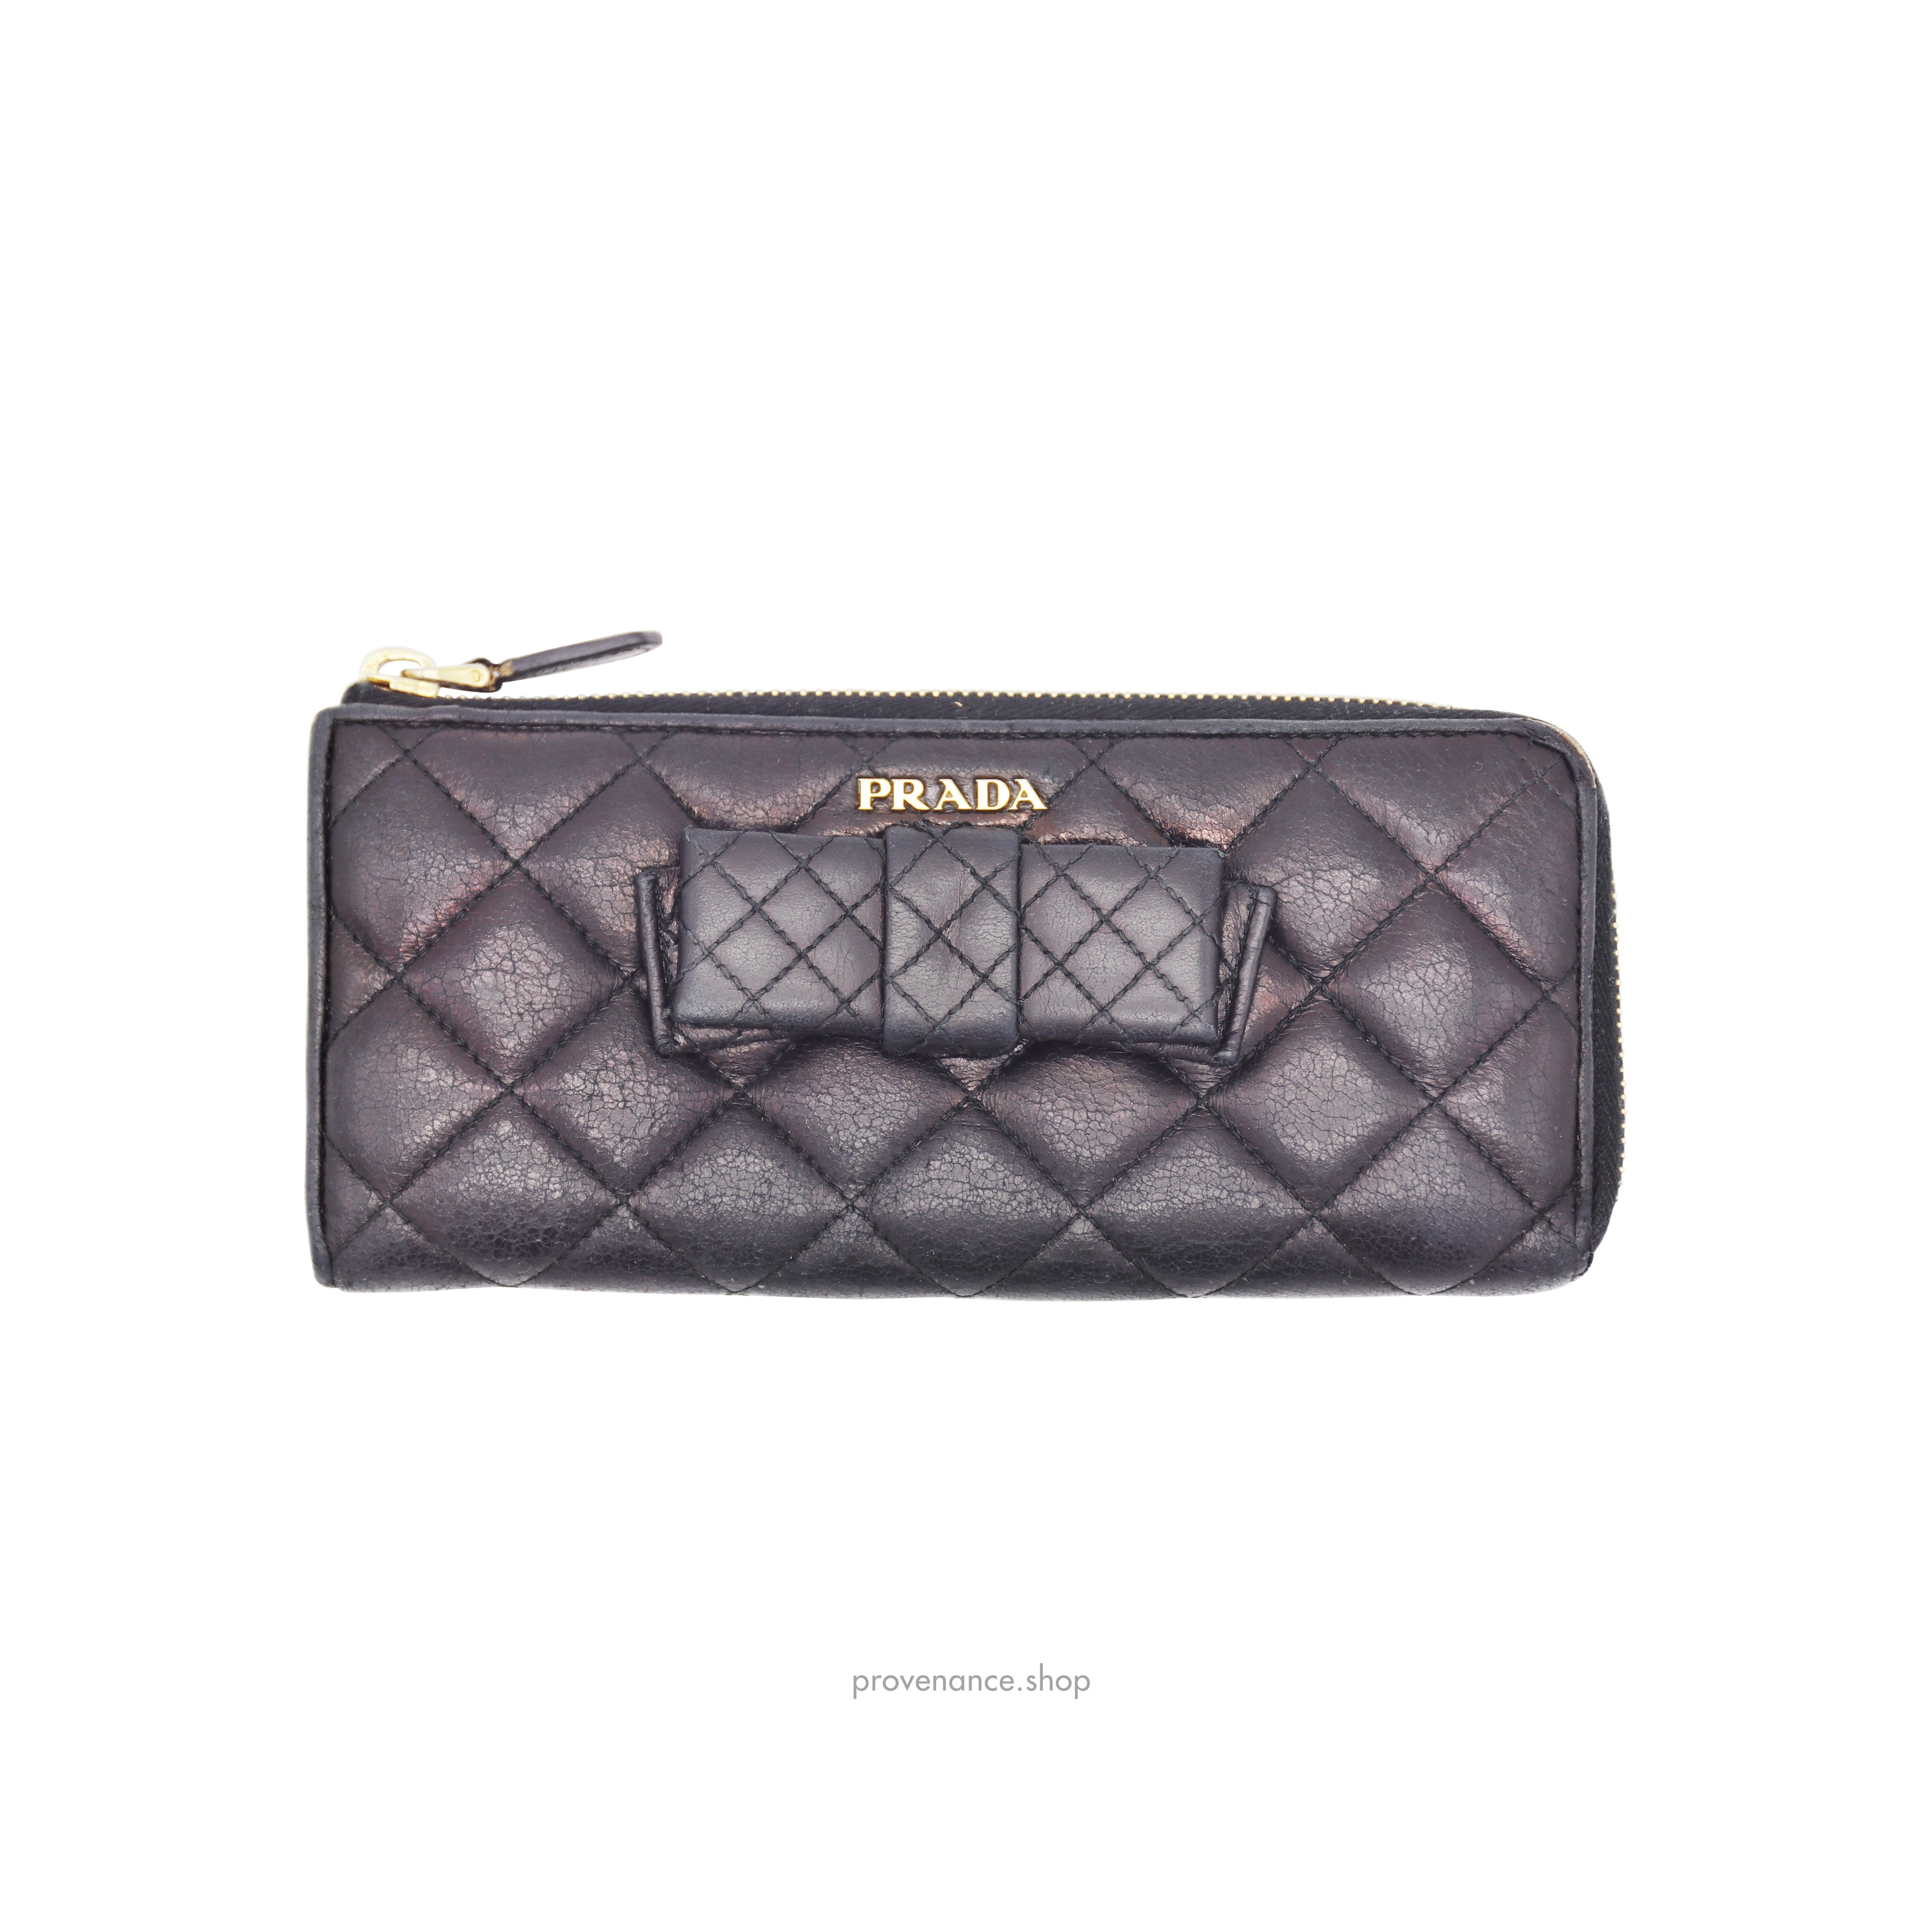 Prada Long Wallet - Quilted Black Calfskin Leather - 1